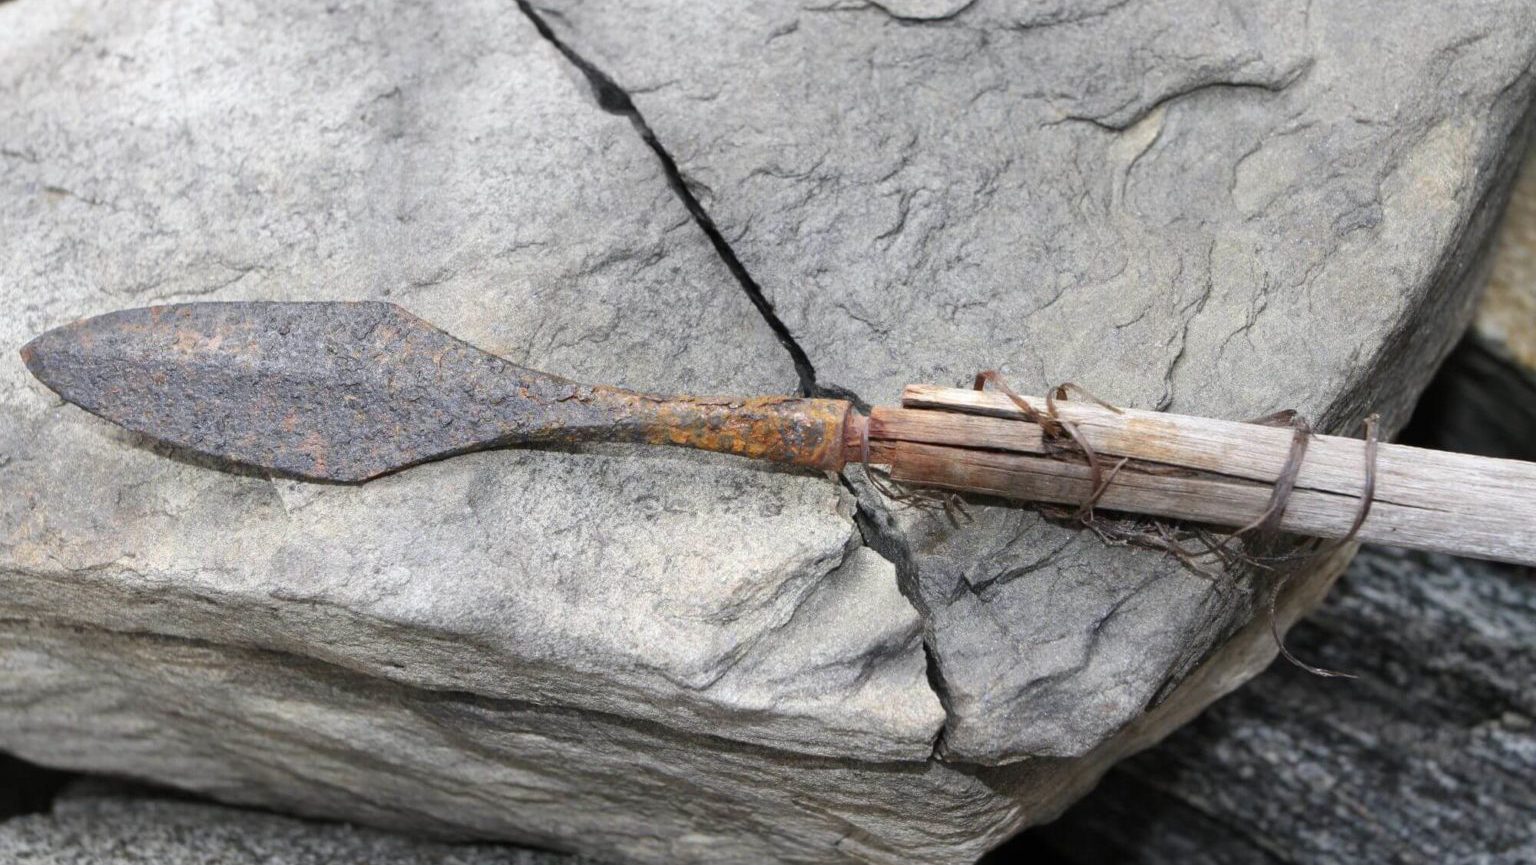 6,000 years of arrows emerge from melting Norwegian ice patch